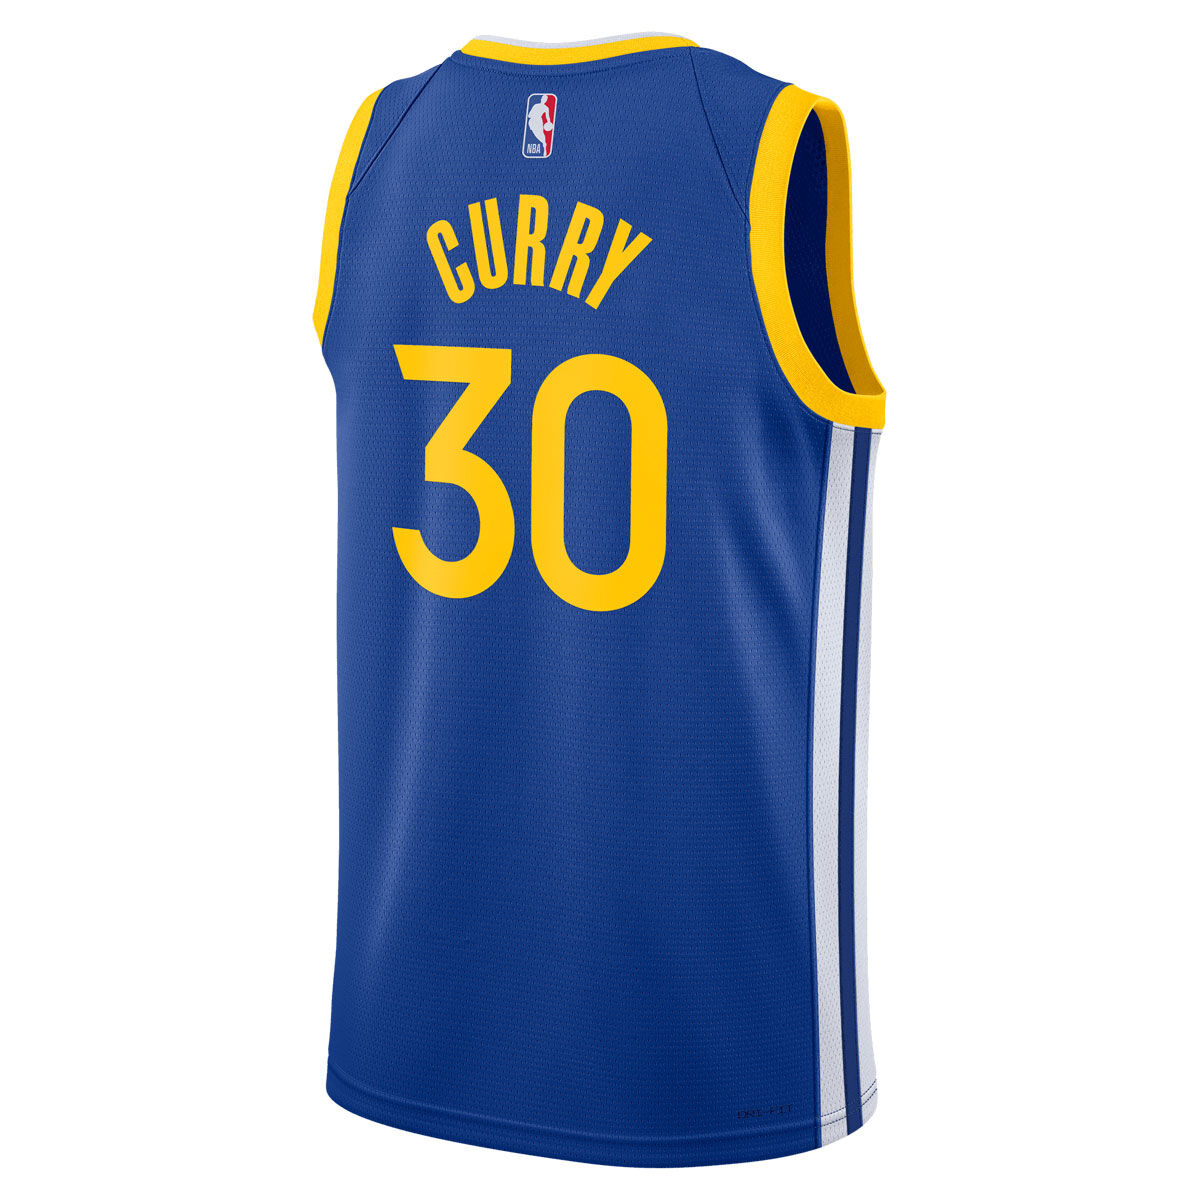 Golden State Warriors: Stephen Curry 2021 Oakland Jersey - NBA Removable Wall Adhesive Wall Decal XL